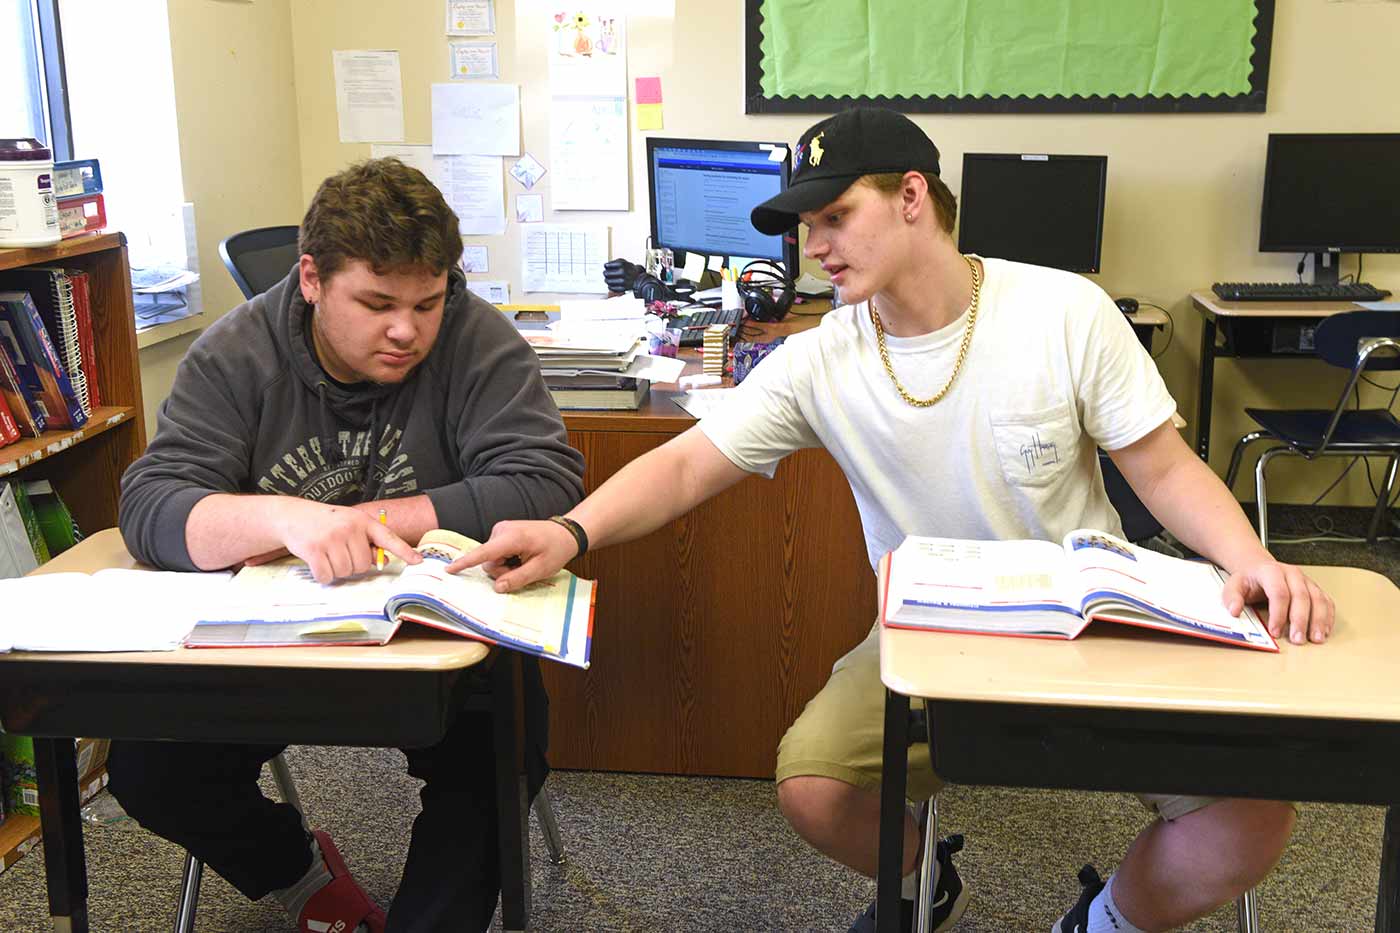 Two Natchaug students work together out of textbooks during class